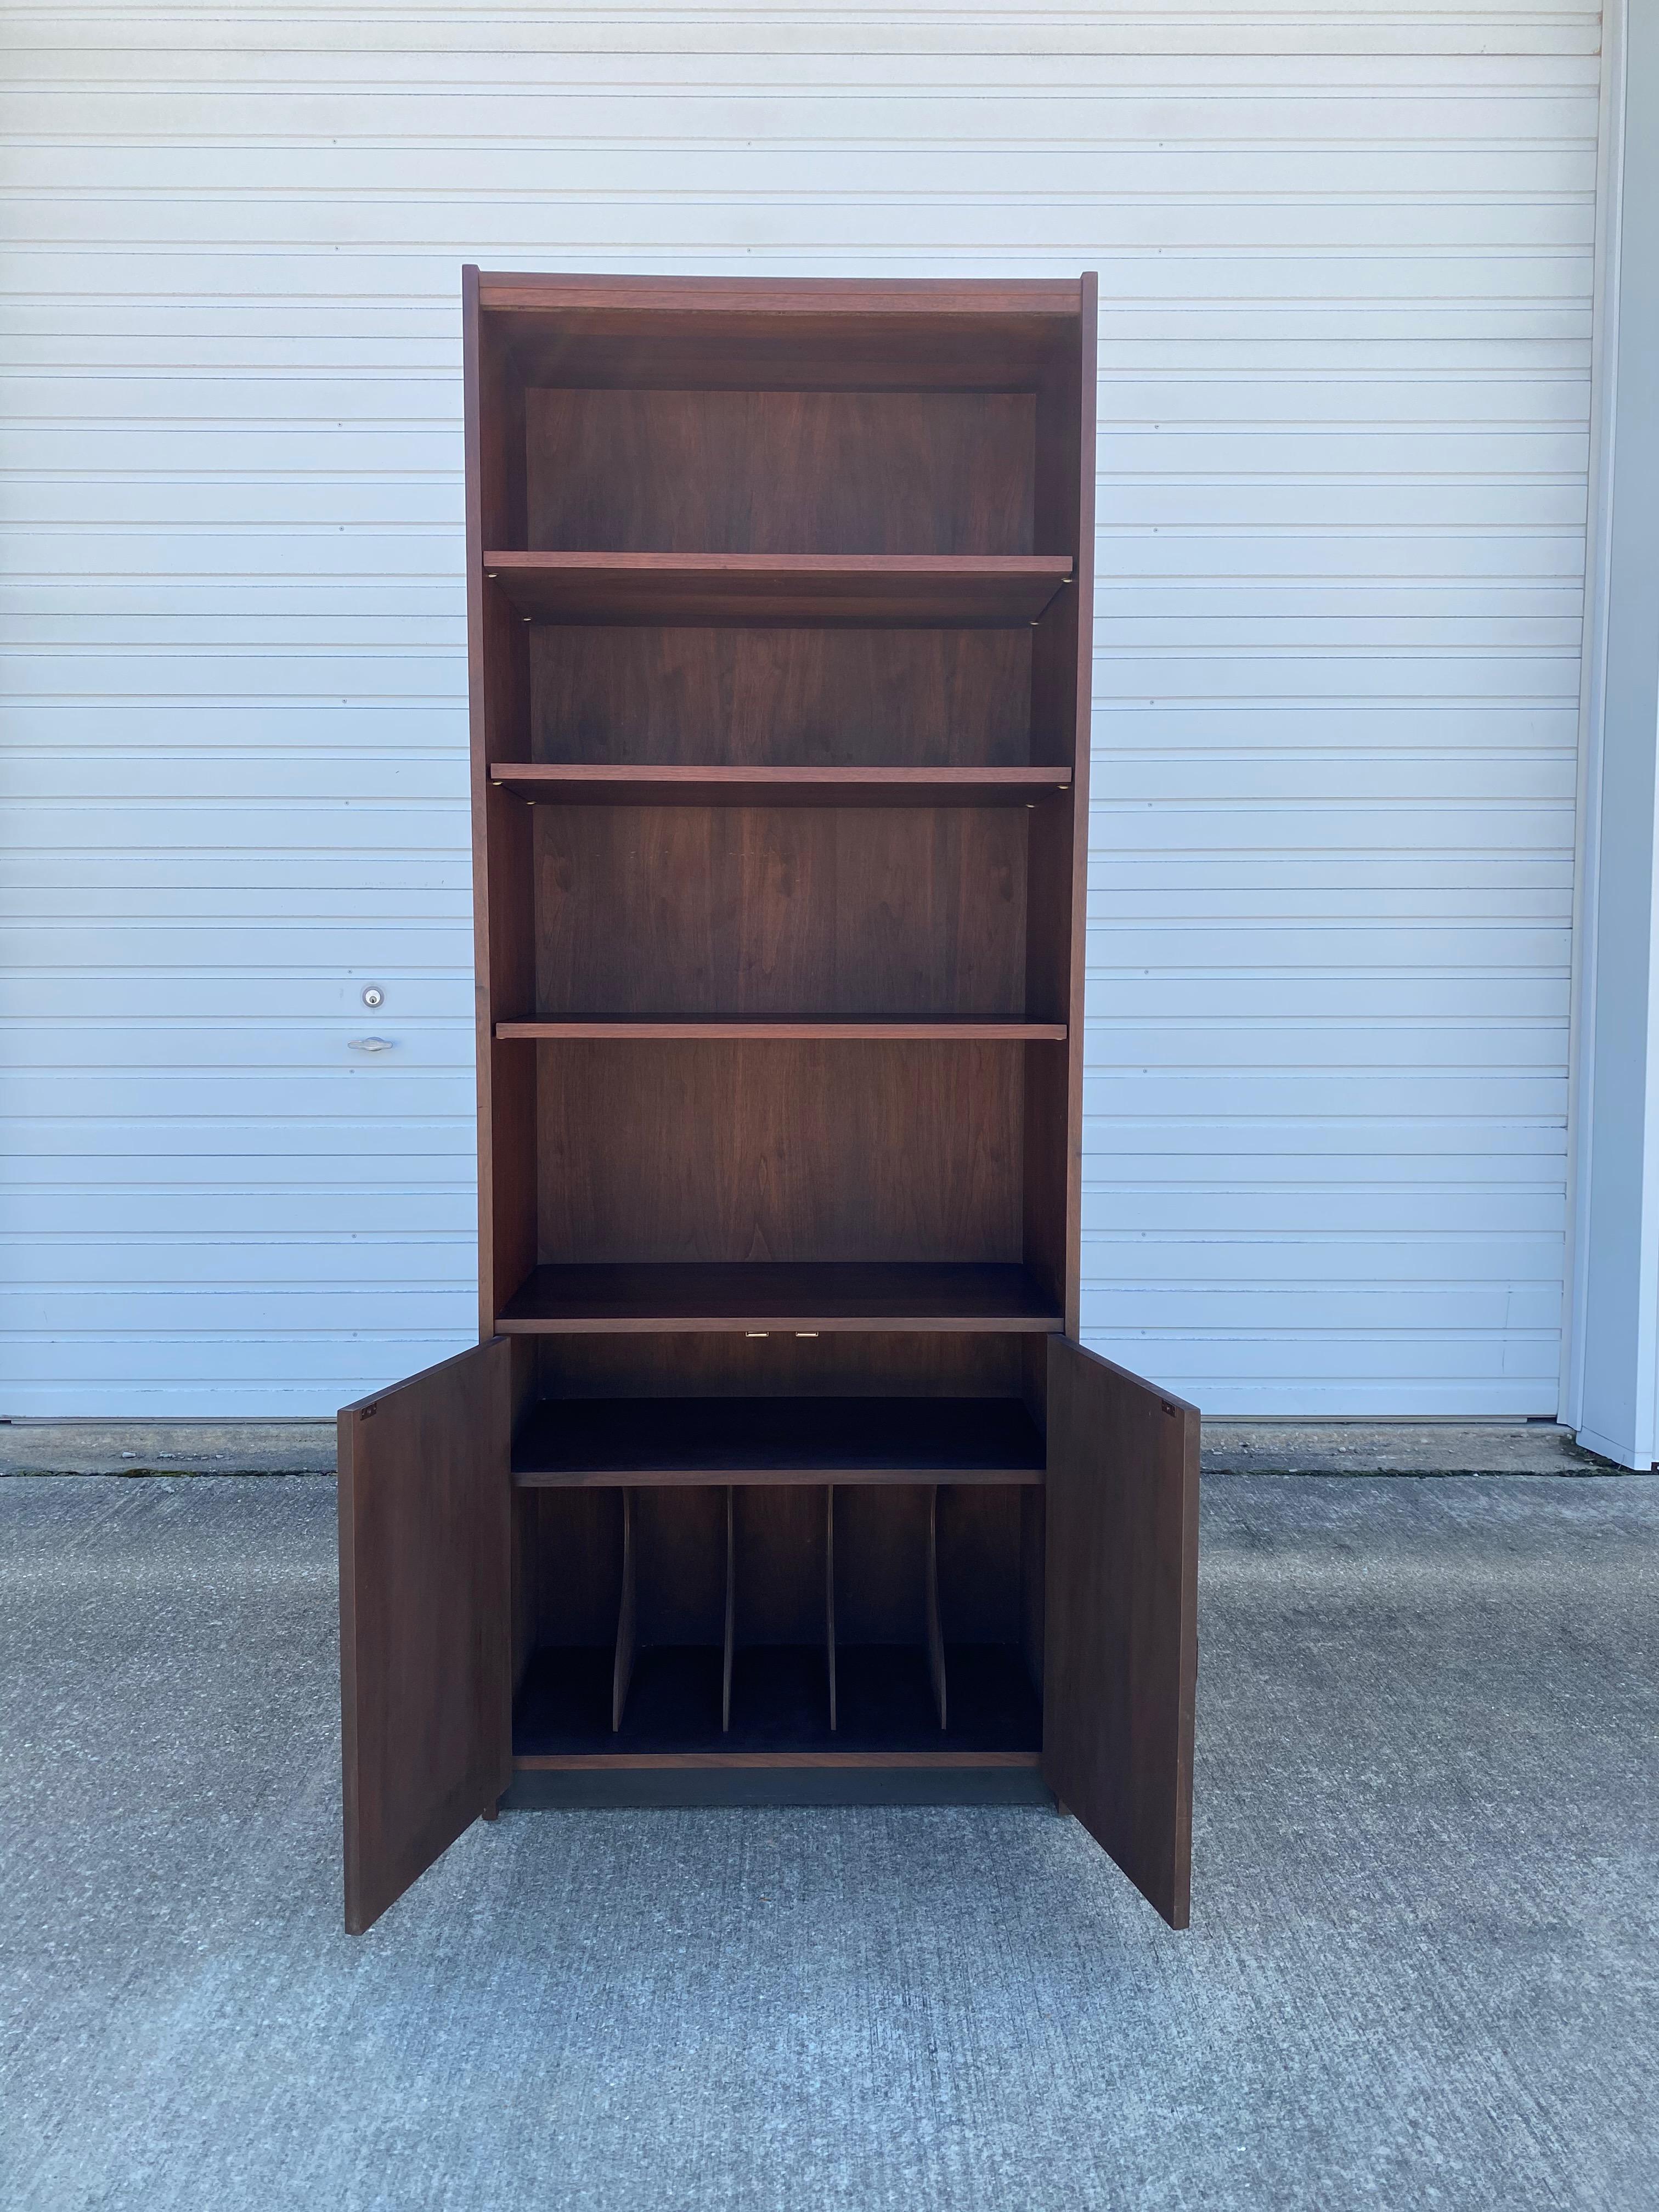 Beautiful Danish modern bookcase and cabinet. Inside the cabinet holds a file divider, which makes this piece pretty unique! The four shelves can be moved to any height you please. The bottom of the shelf has a black detail to make it look like it